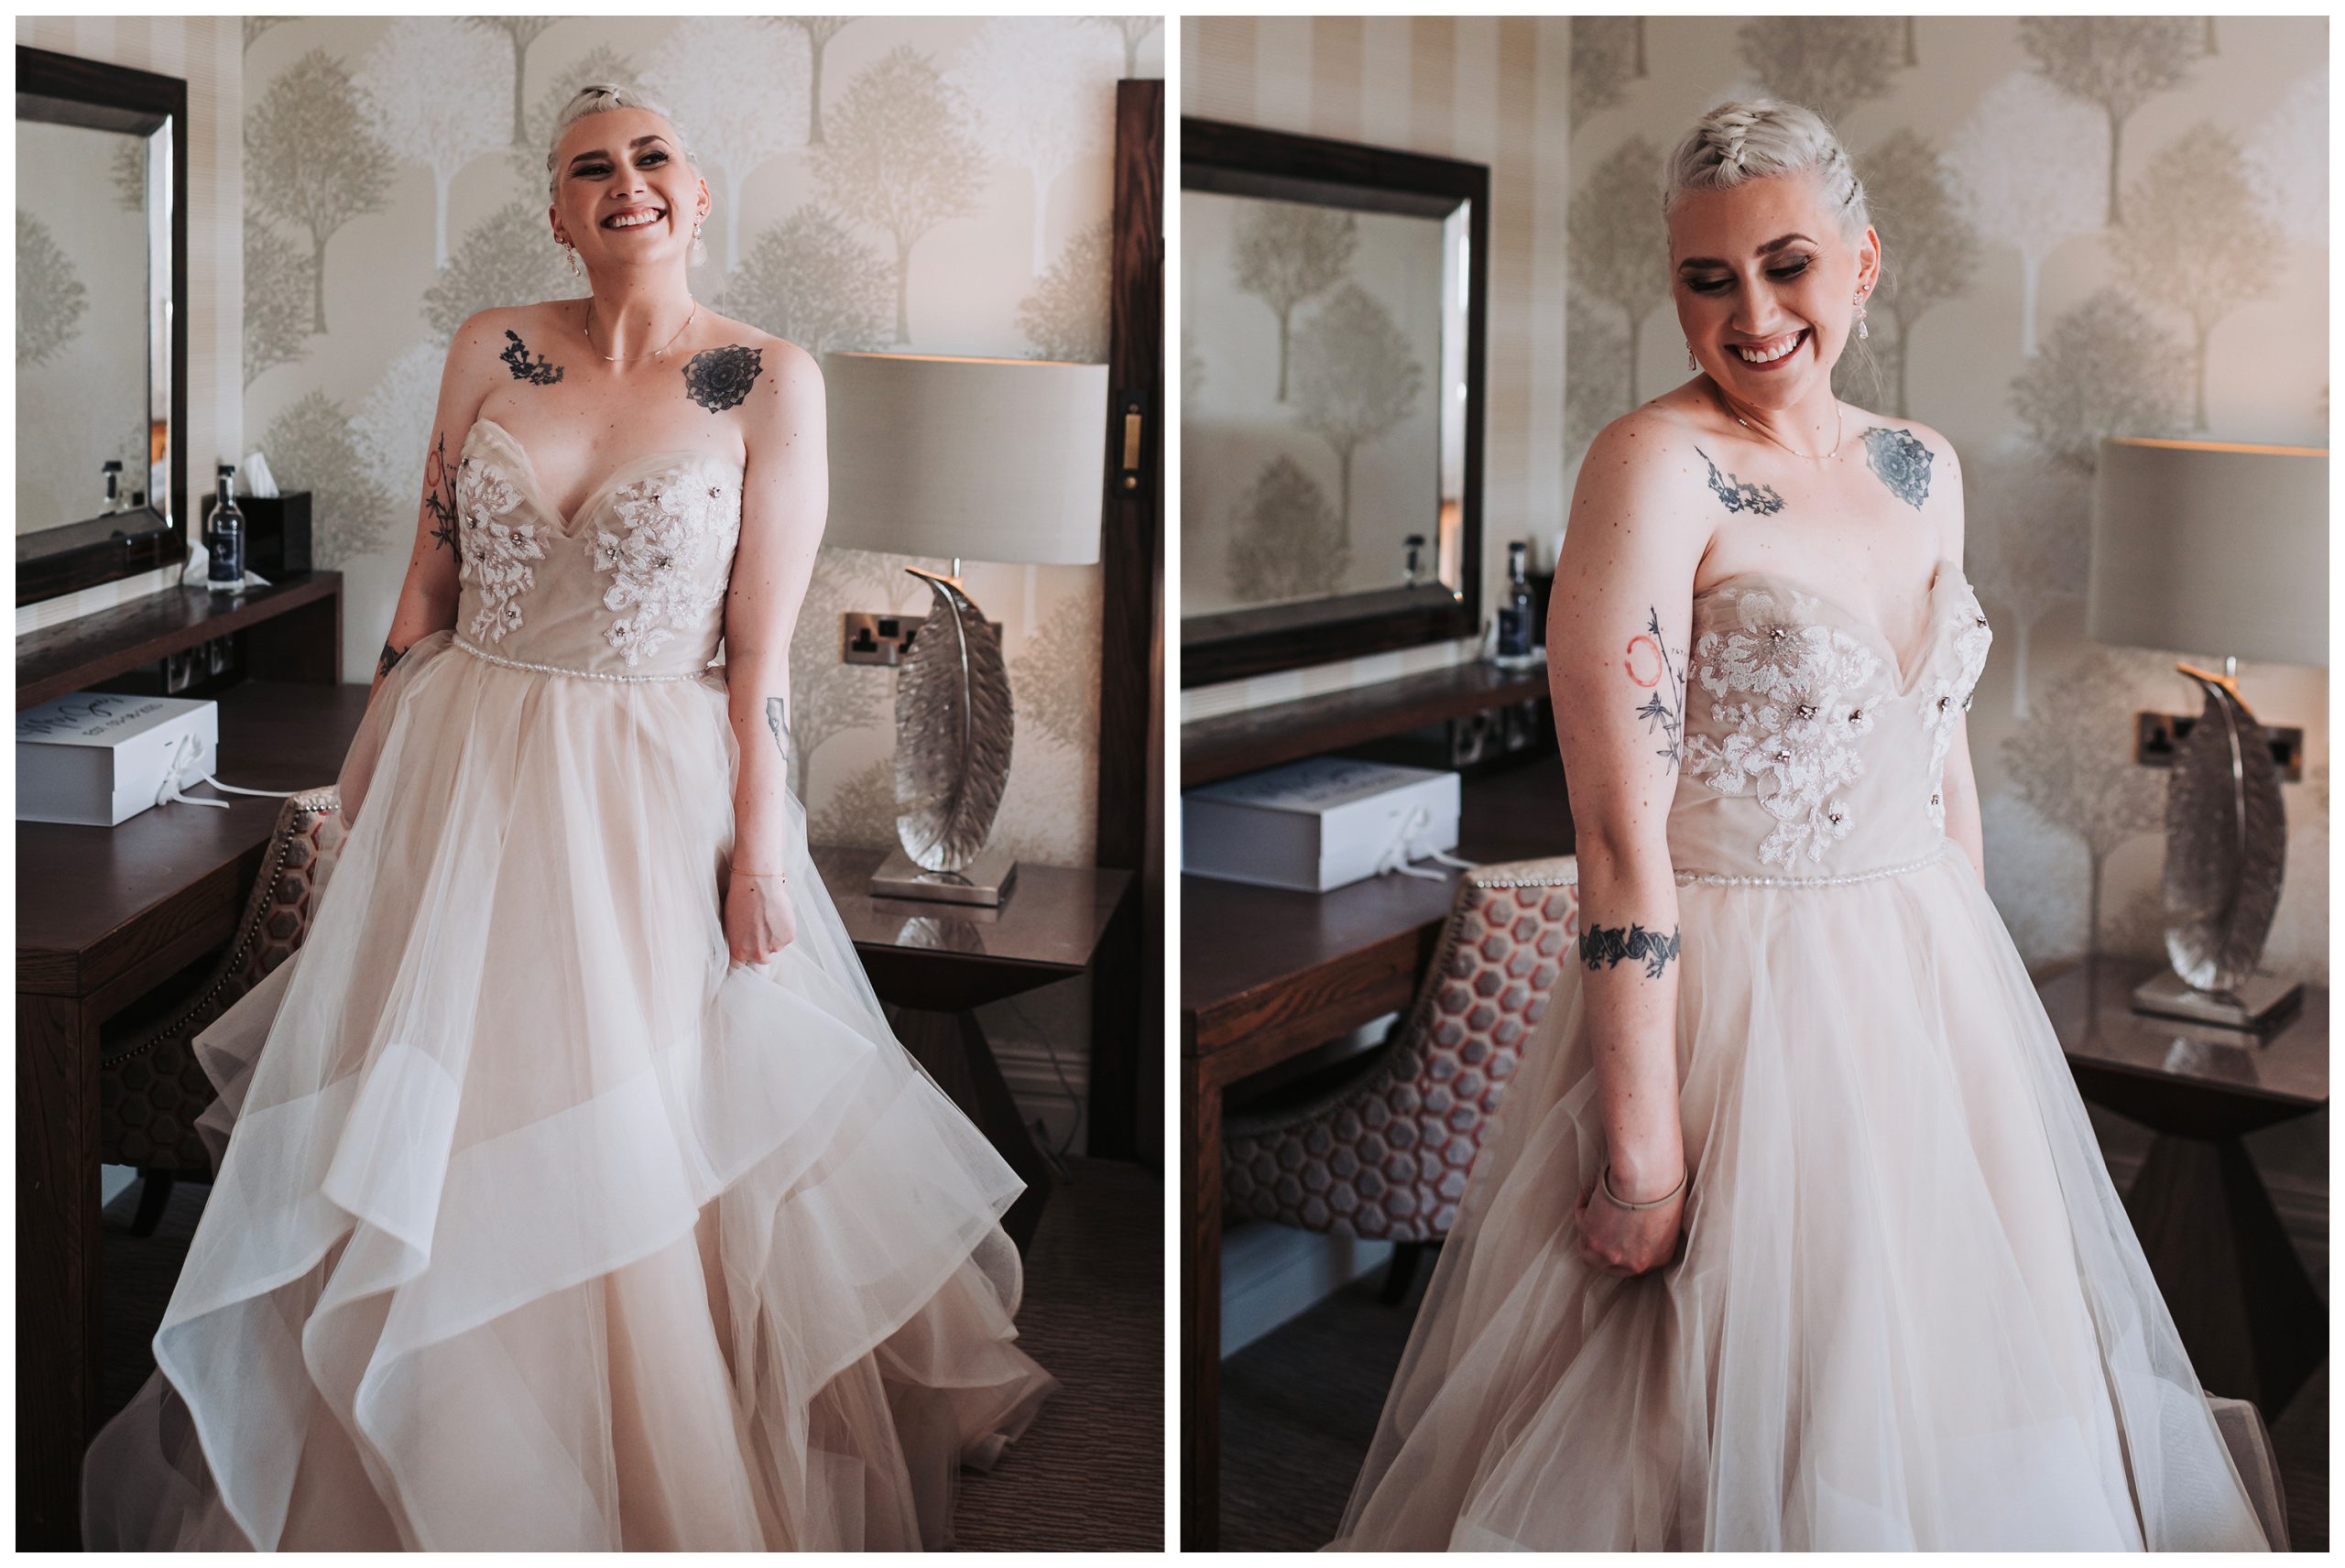 A beautiful bride strikes poses in her wedding dress during the morning preparations of her wedding day at The Grosvenor Pulford Hotel and Spa.  Image captured by Cheshire wedding photographer Helena Jayne Photography